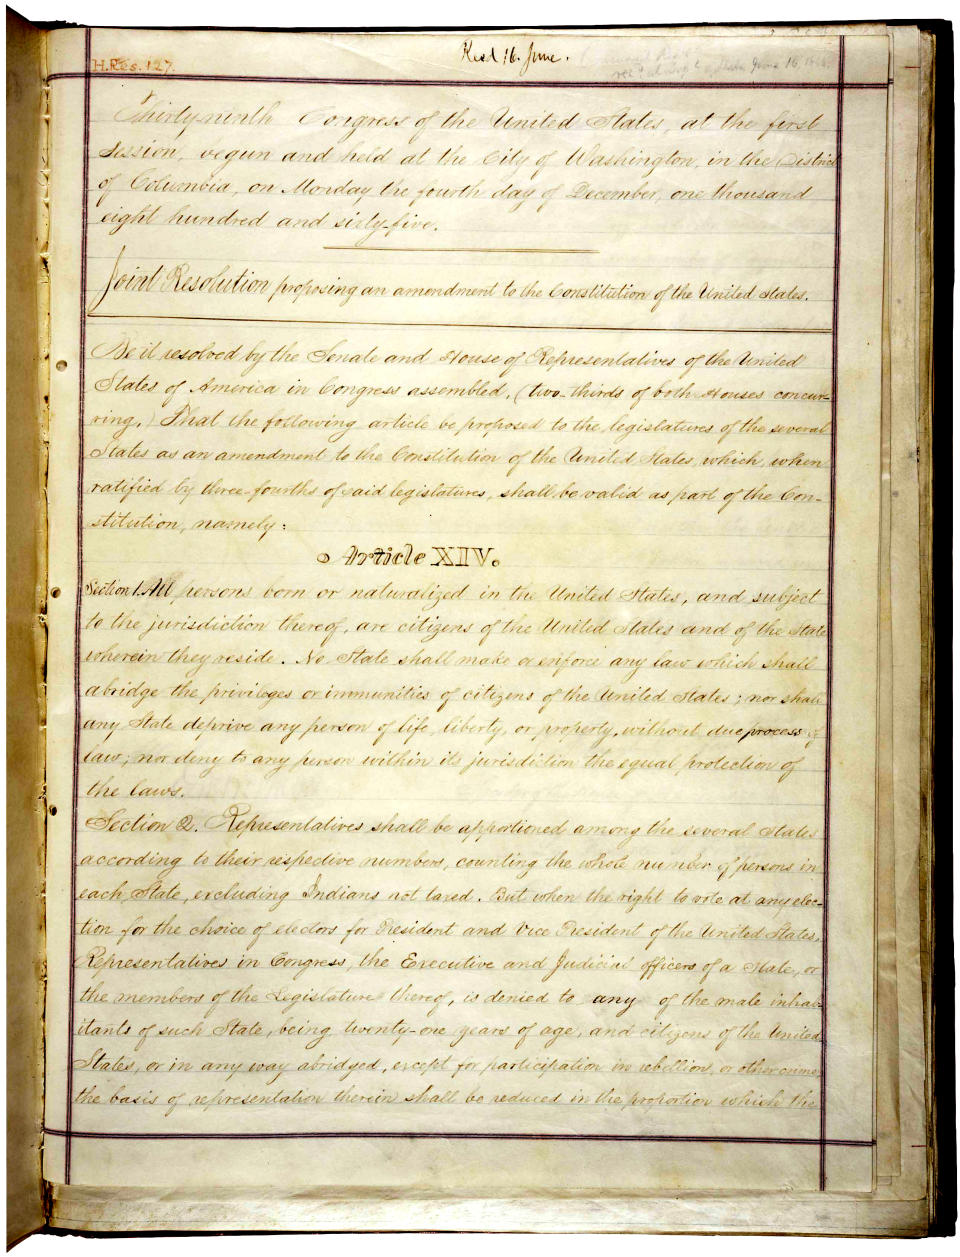 The 14th Amendment of the Constitution. (Photo: NARA)